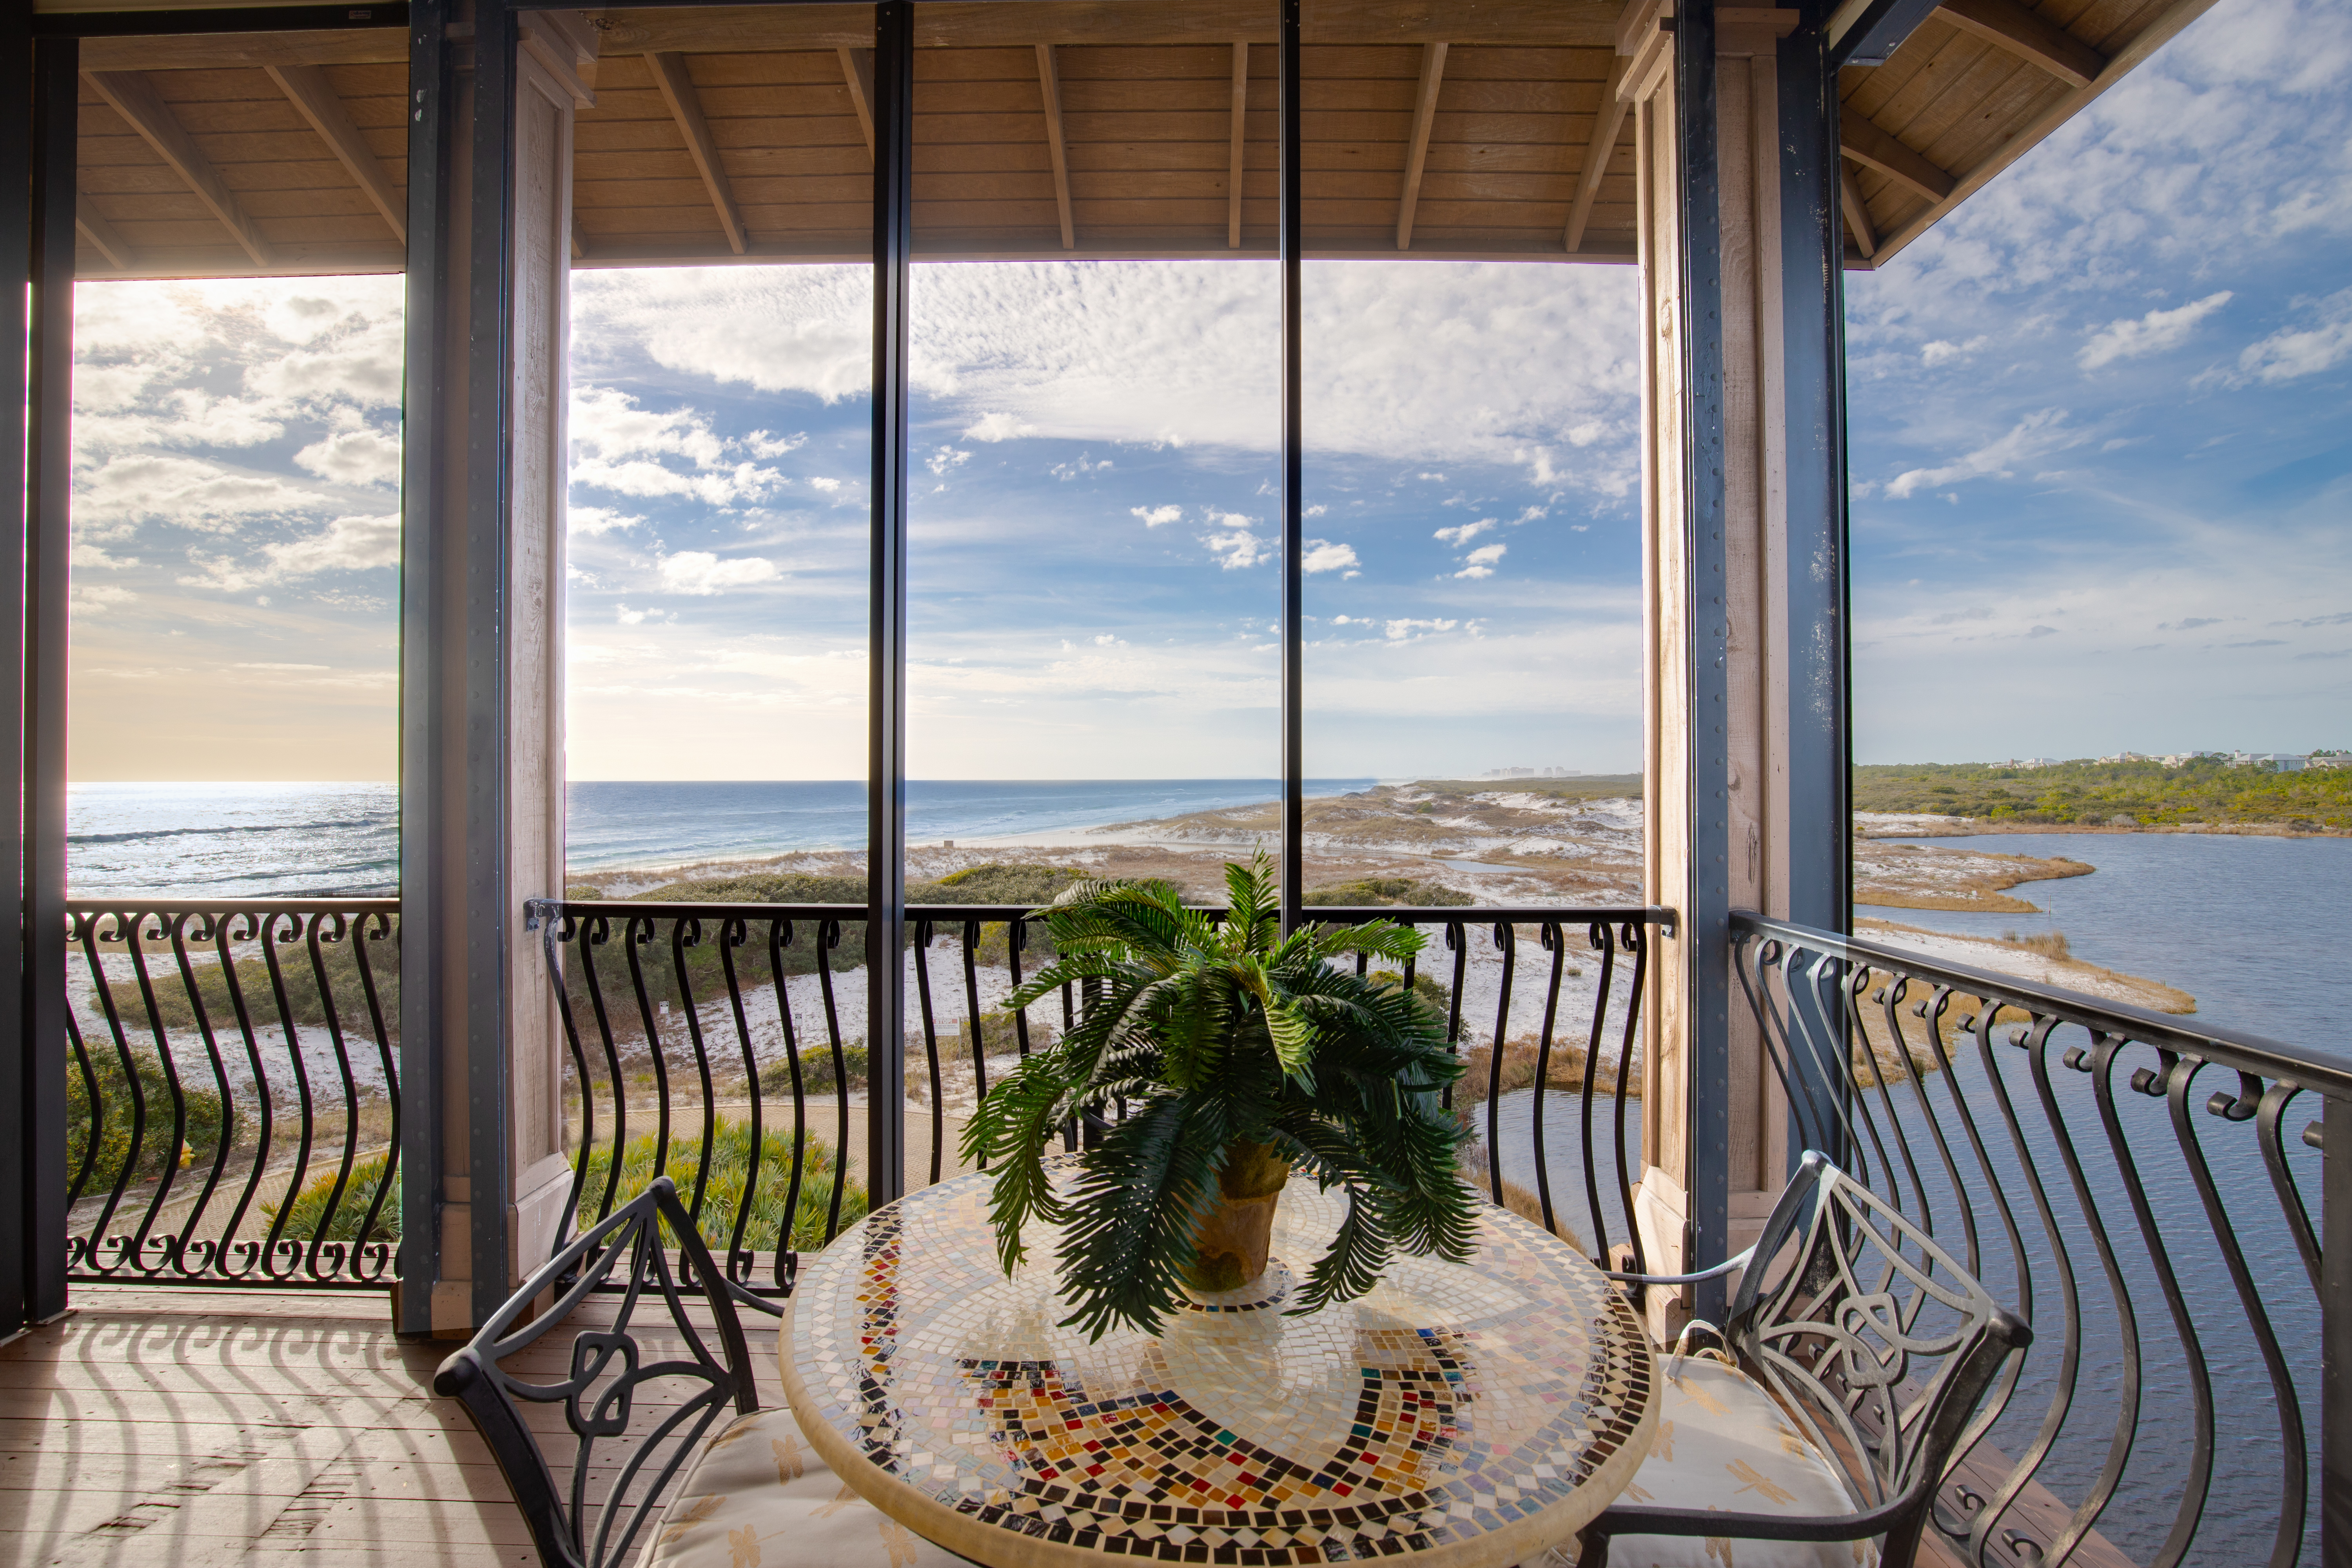 A view of the Gulf and beach from the covered deck of a home in Stallworth Preserve